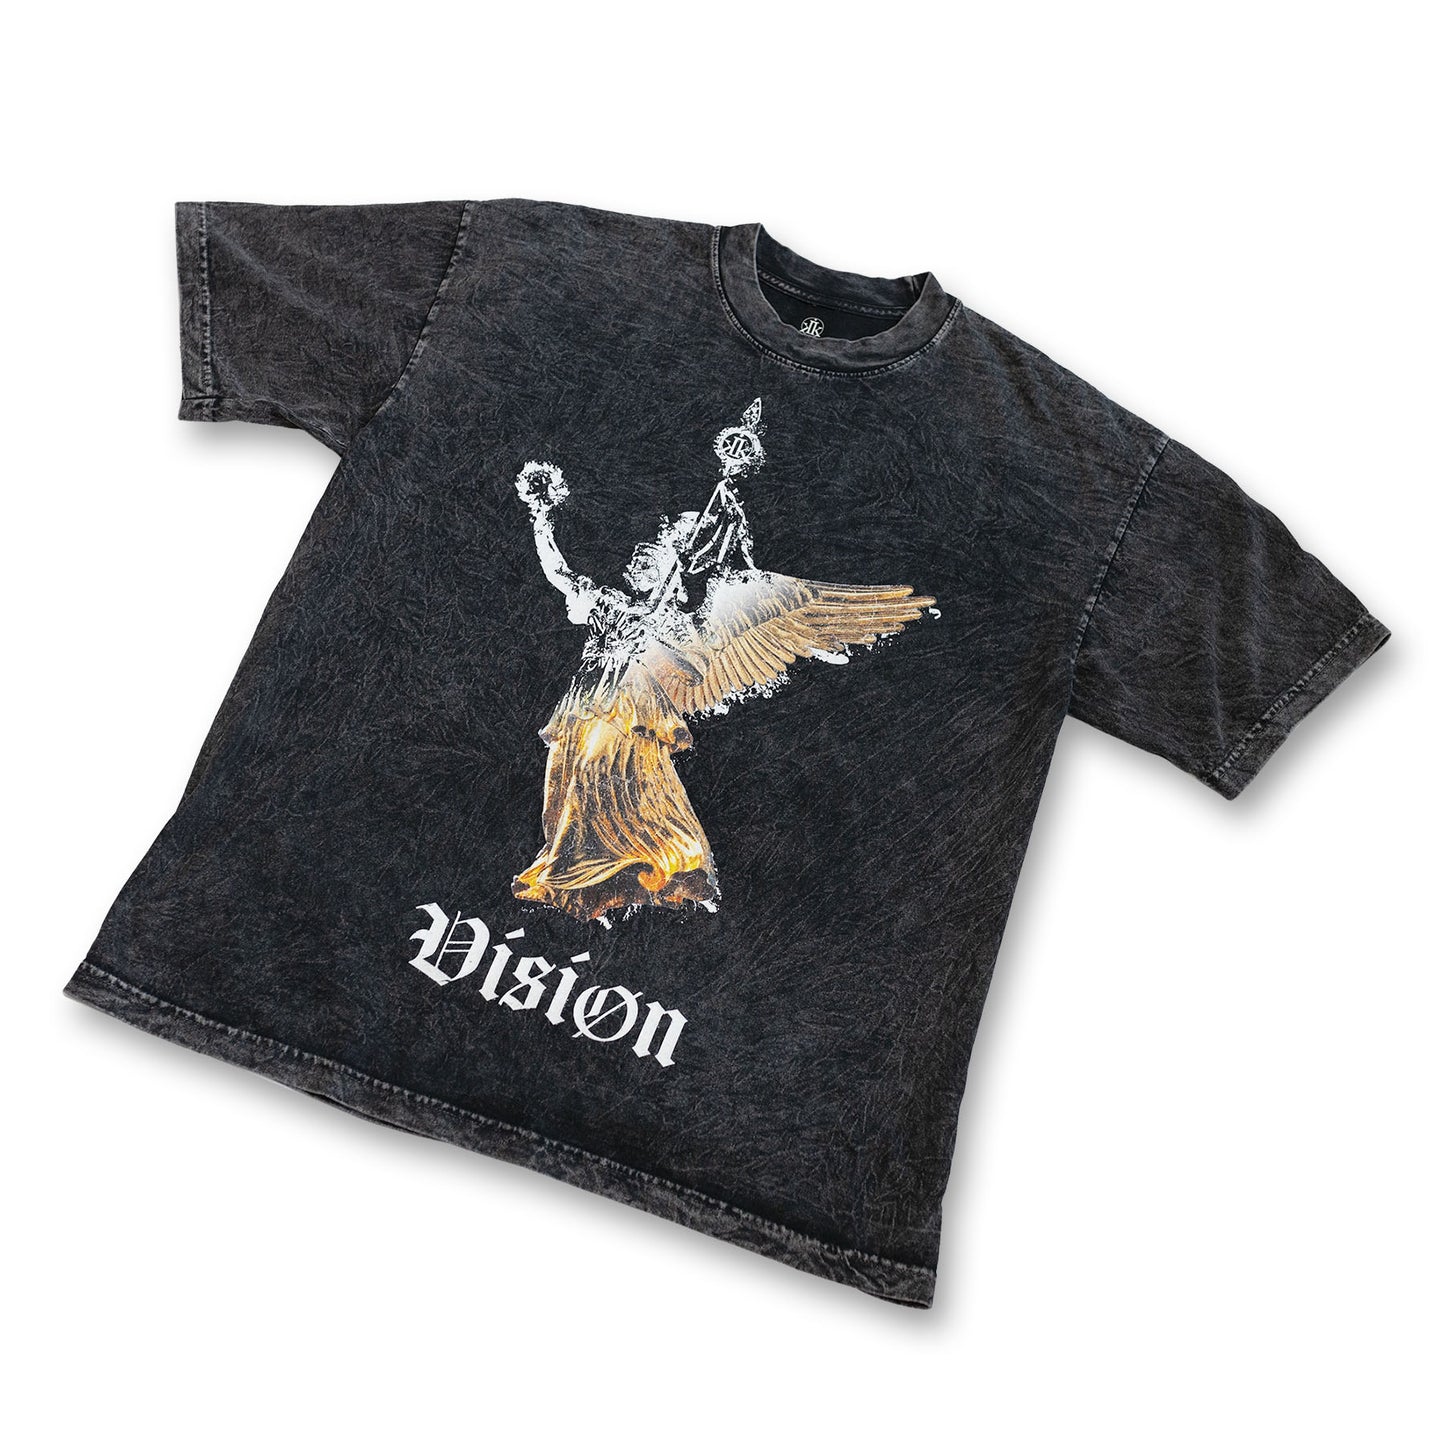 Judgment [Vision] Tee / Carbon Black